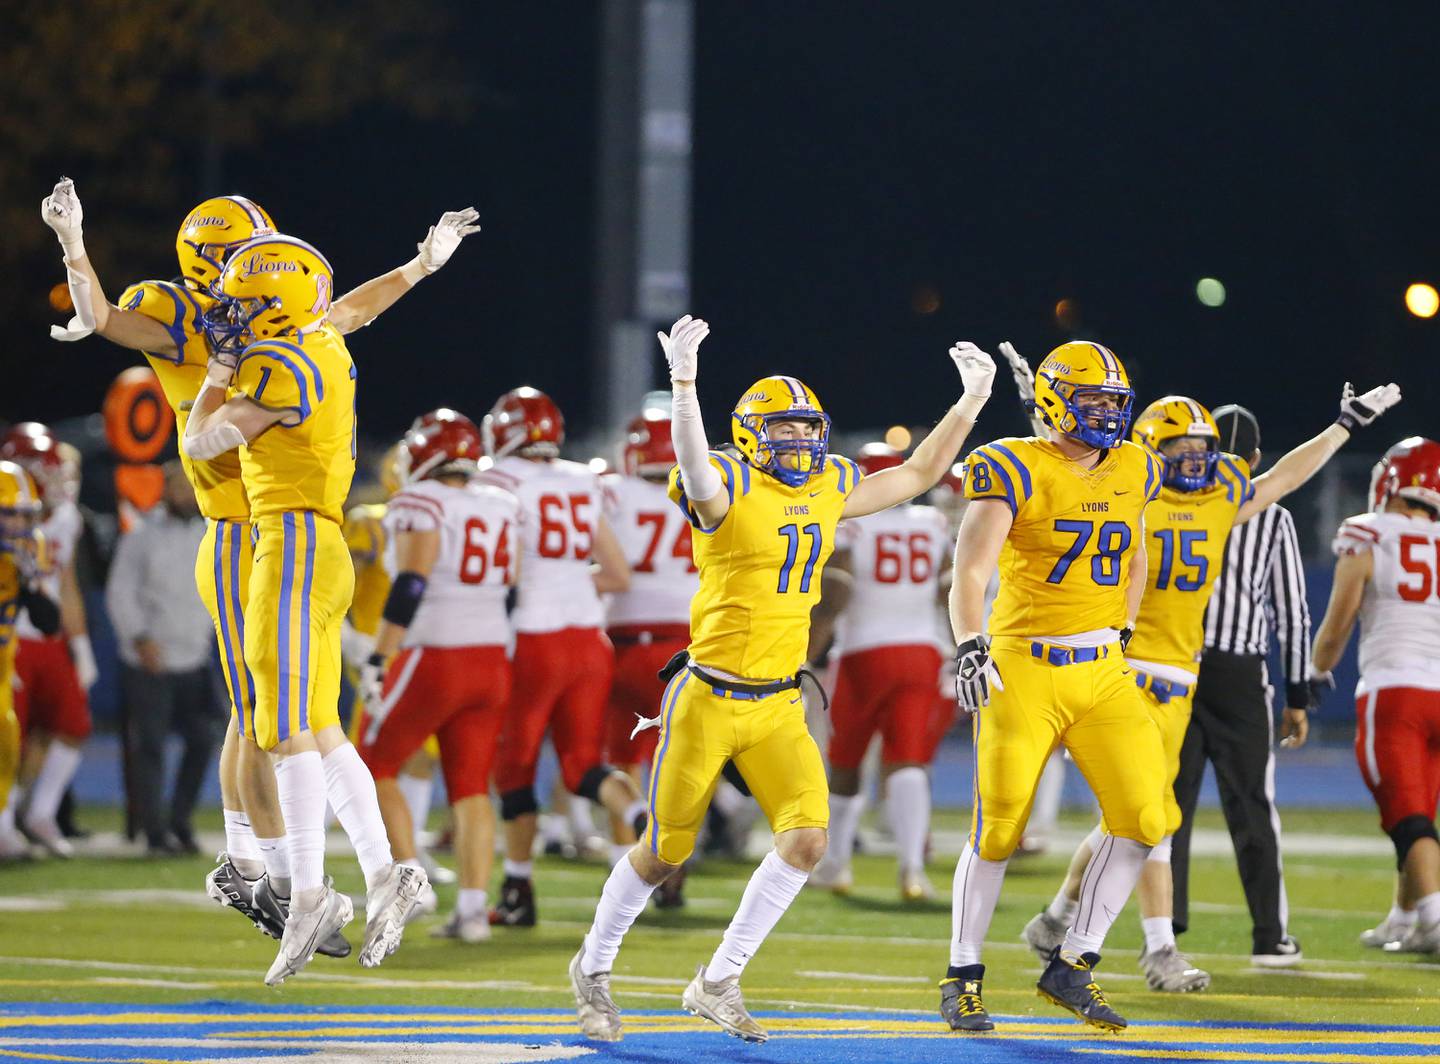 Lyons' defensive line celebrates a fourth down stop during a first round Class 8A varsity football playoff game between Lyons Township and Naperville Central on Friday, Oct. 28, 2022 in Western Springs, IL.